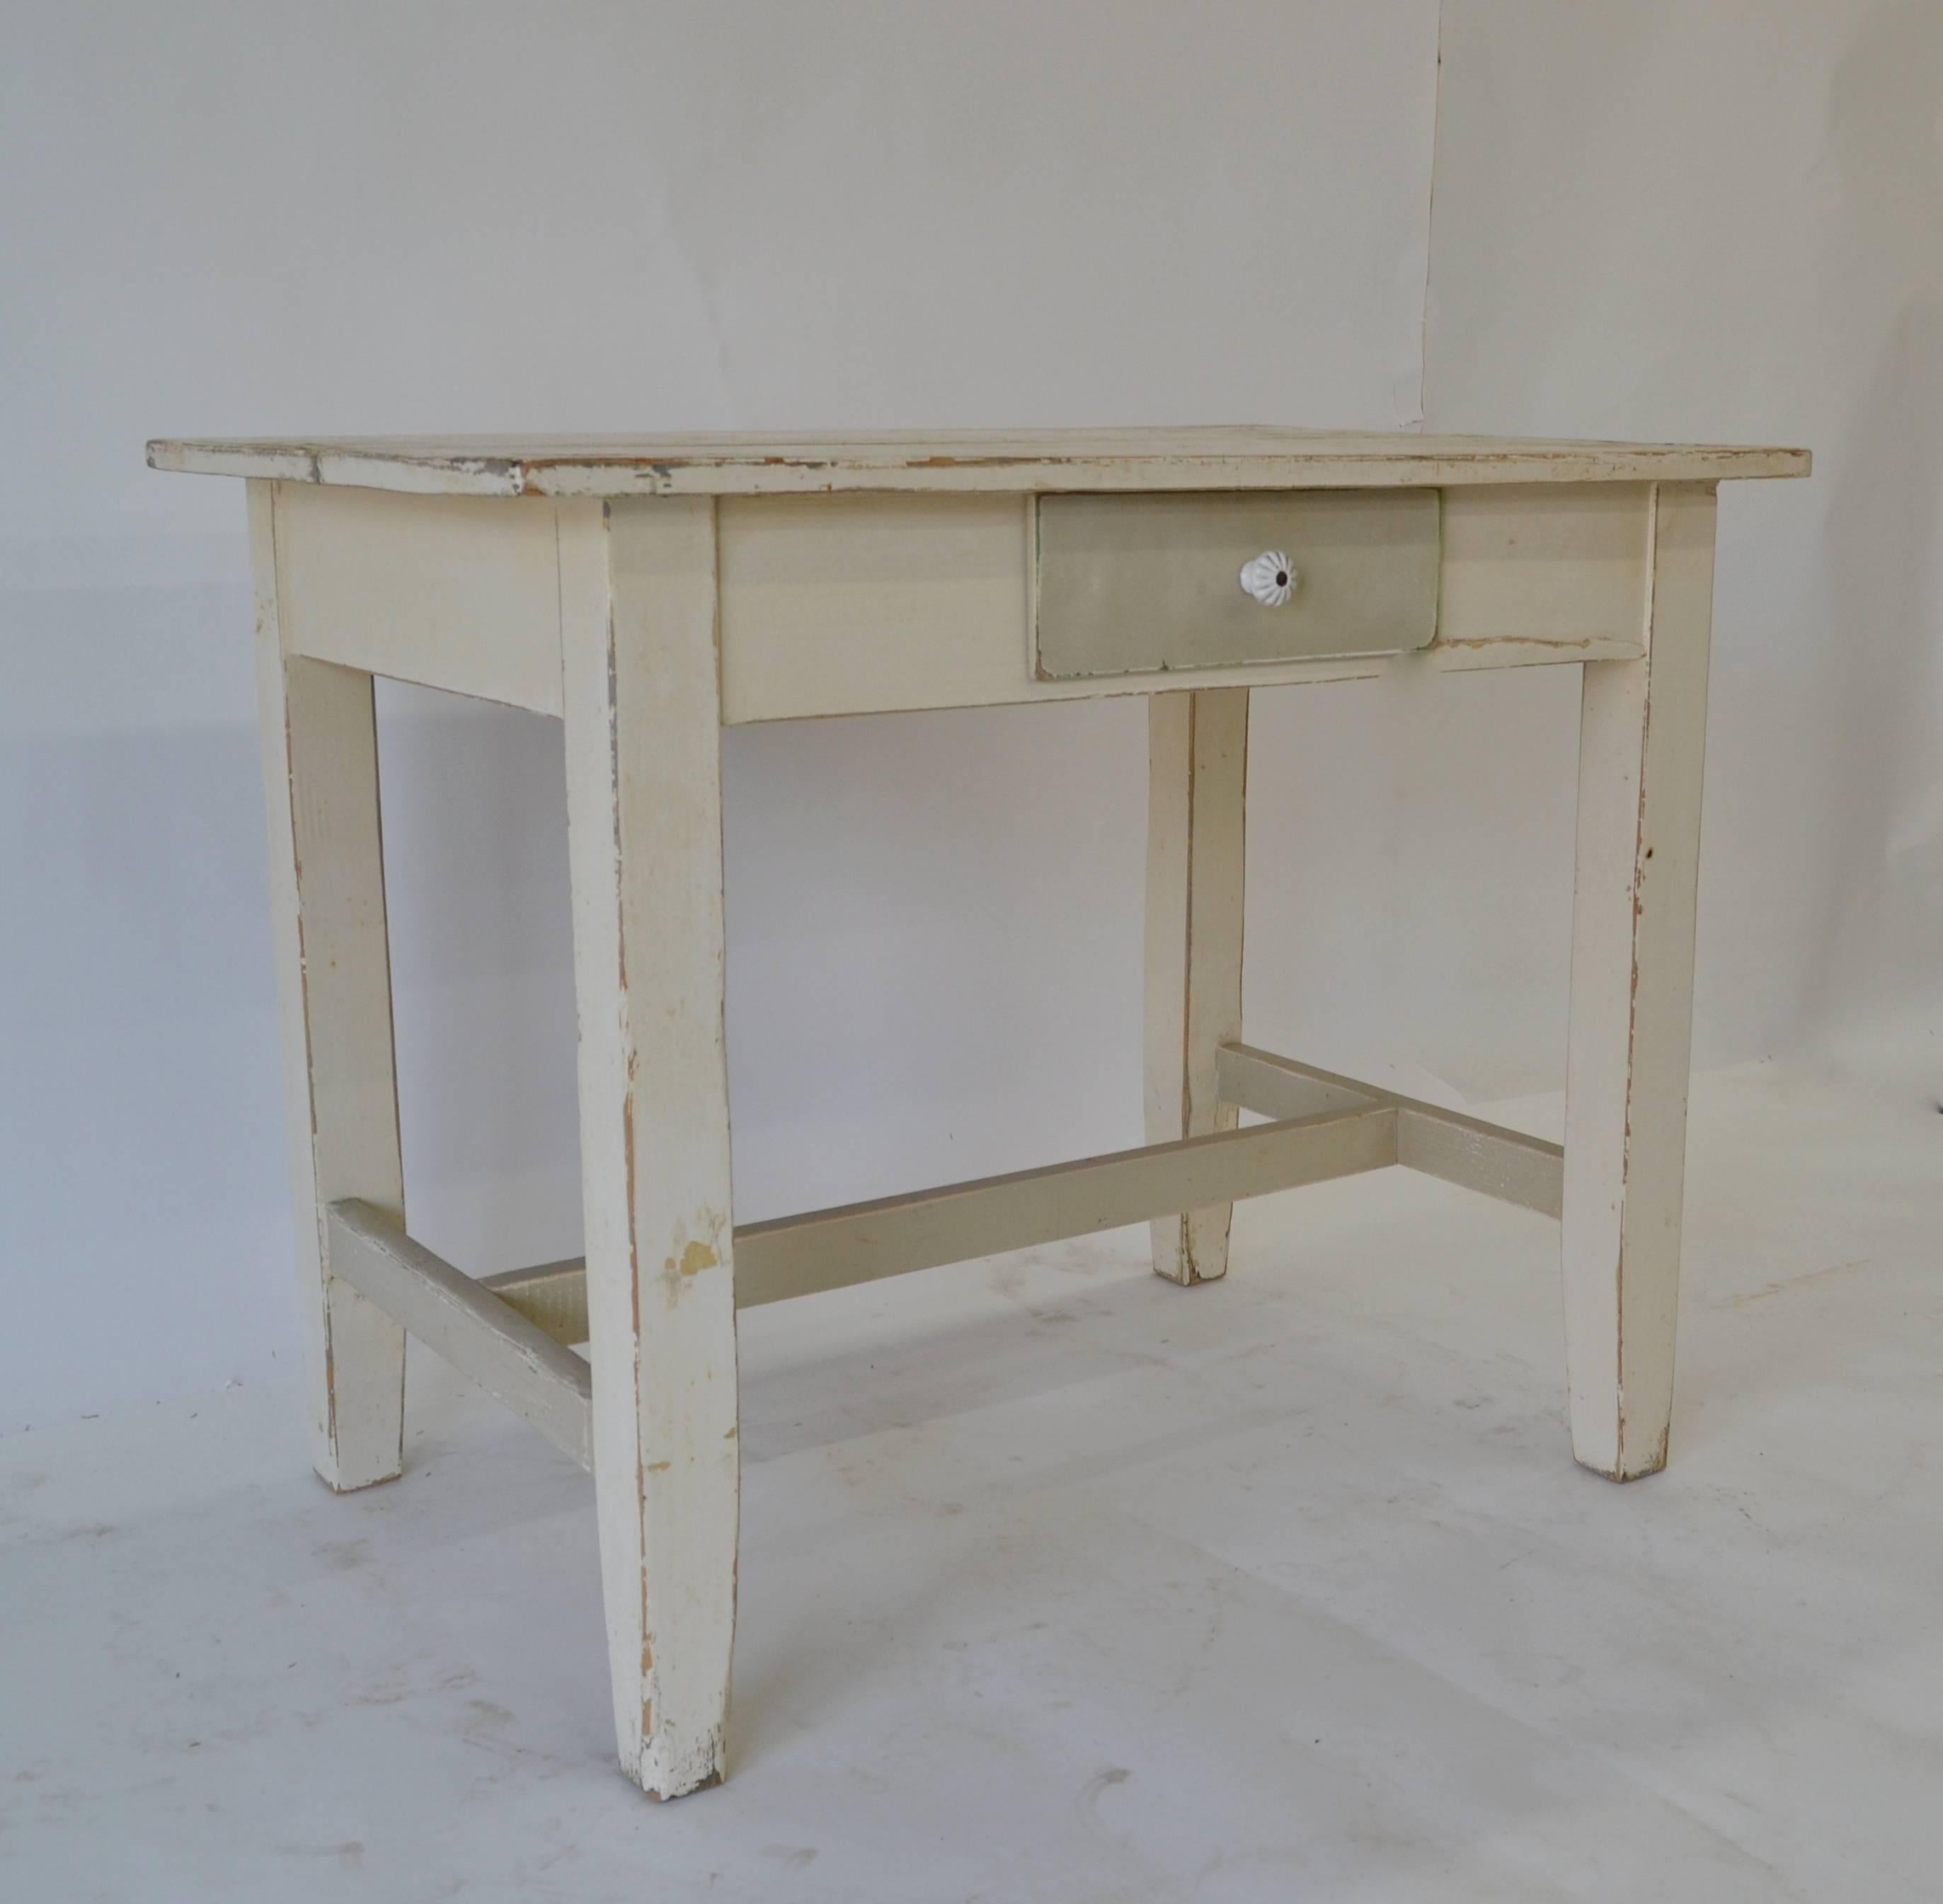 This is a small pine stretcher base table with a single hand-cut dovetailed drawer. The square legs taper slightly towards the foot. Great in a small kitchen or as a writing desk. In old worn Gustavian-like tones of grey and white paint, with much